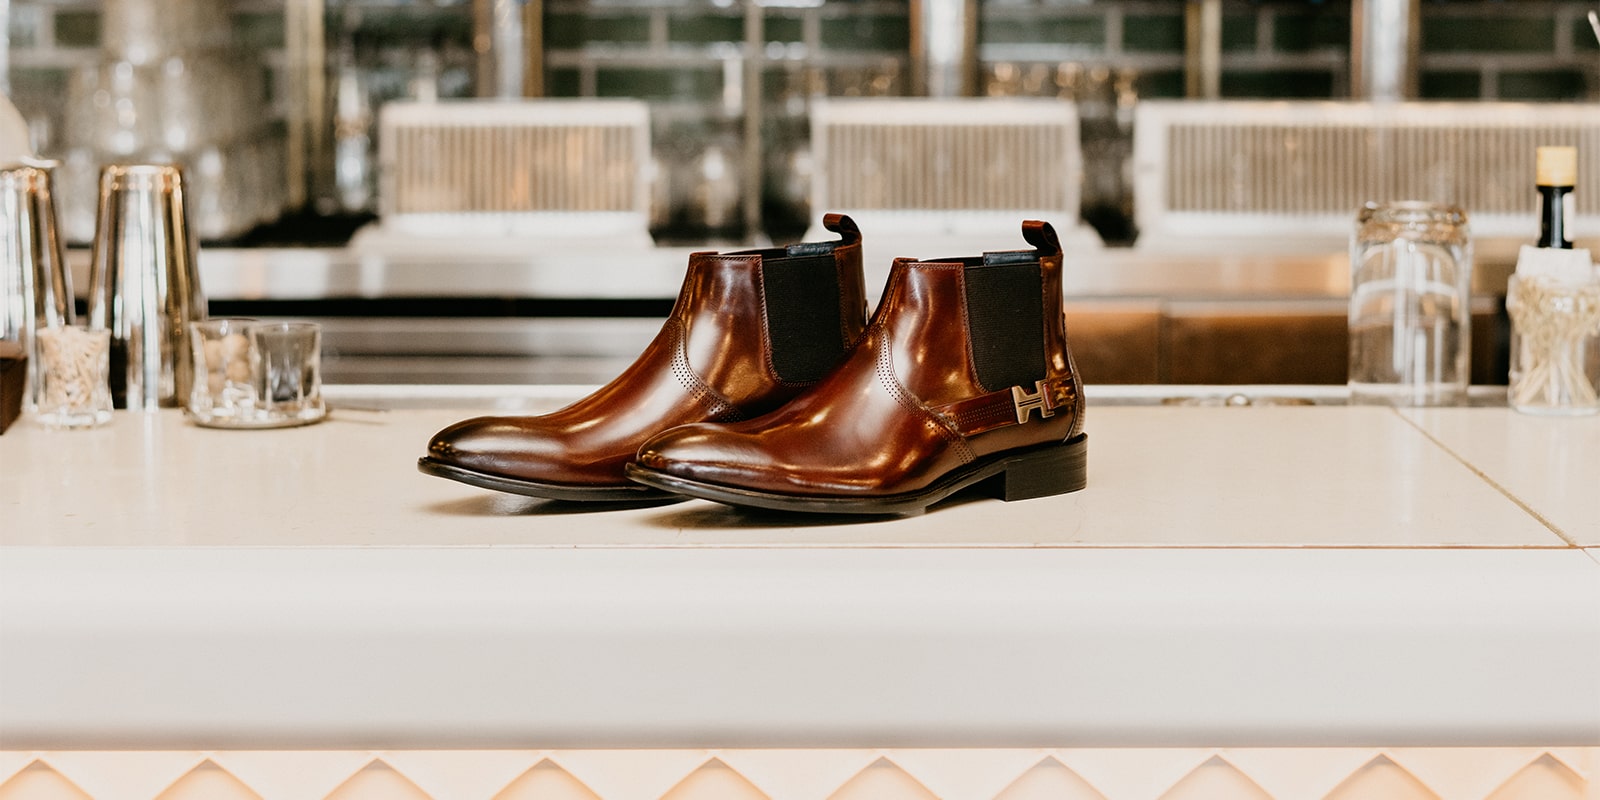 The featured product is the Joffrey Plain Toe Chelsea Boot in Cognac.